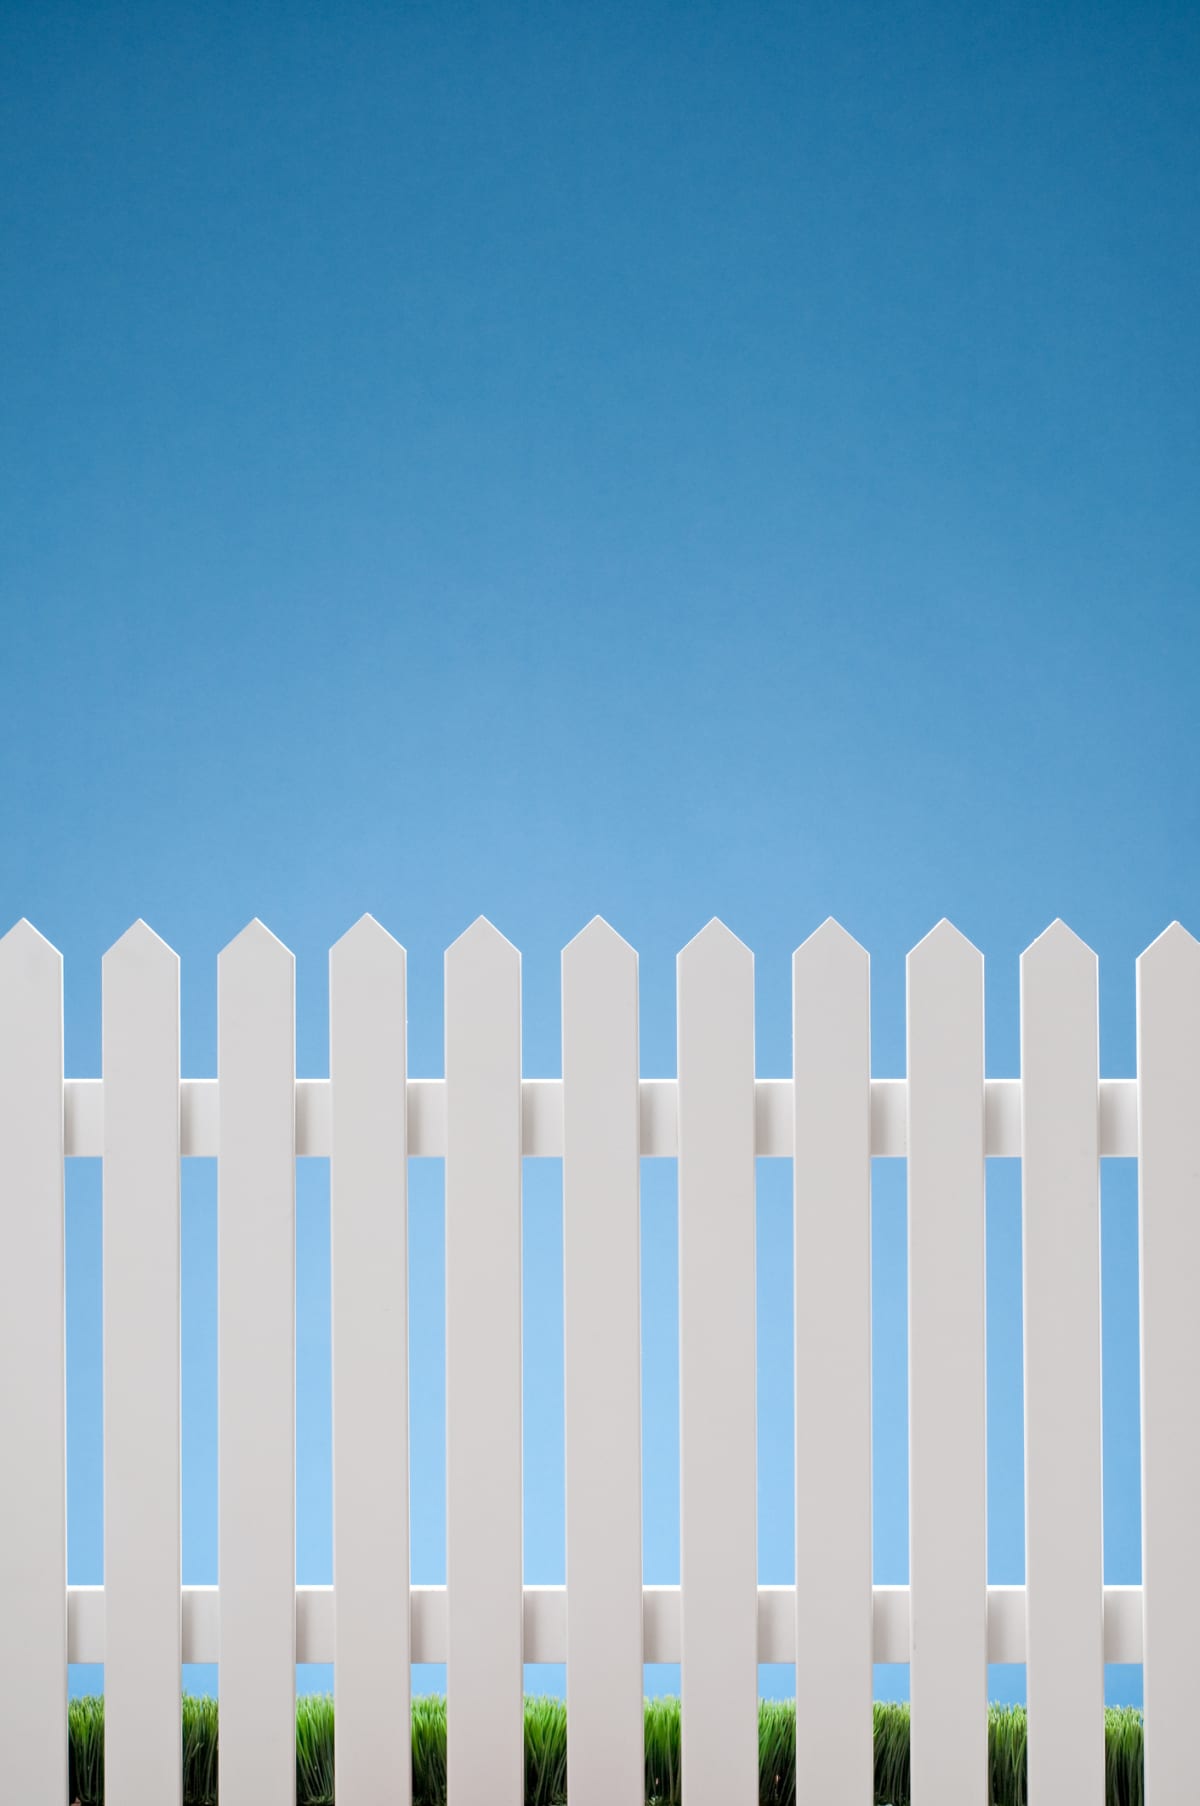 White picket fence against blue sky with grass in the bottom. Shot in the studio.